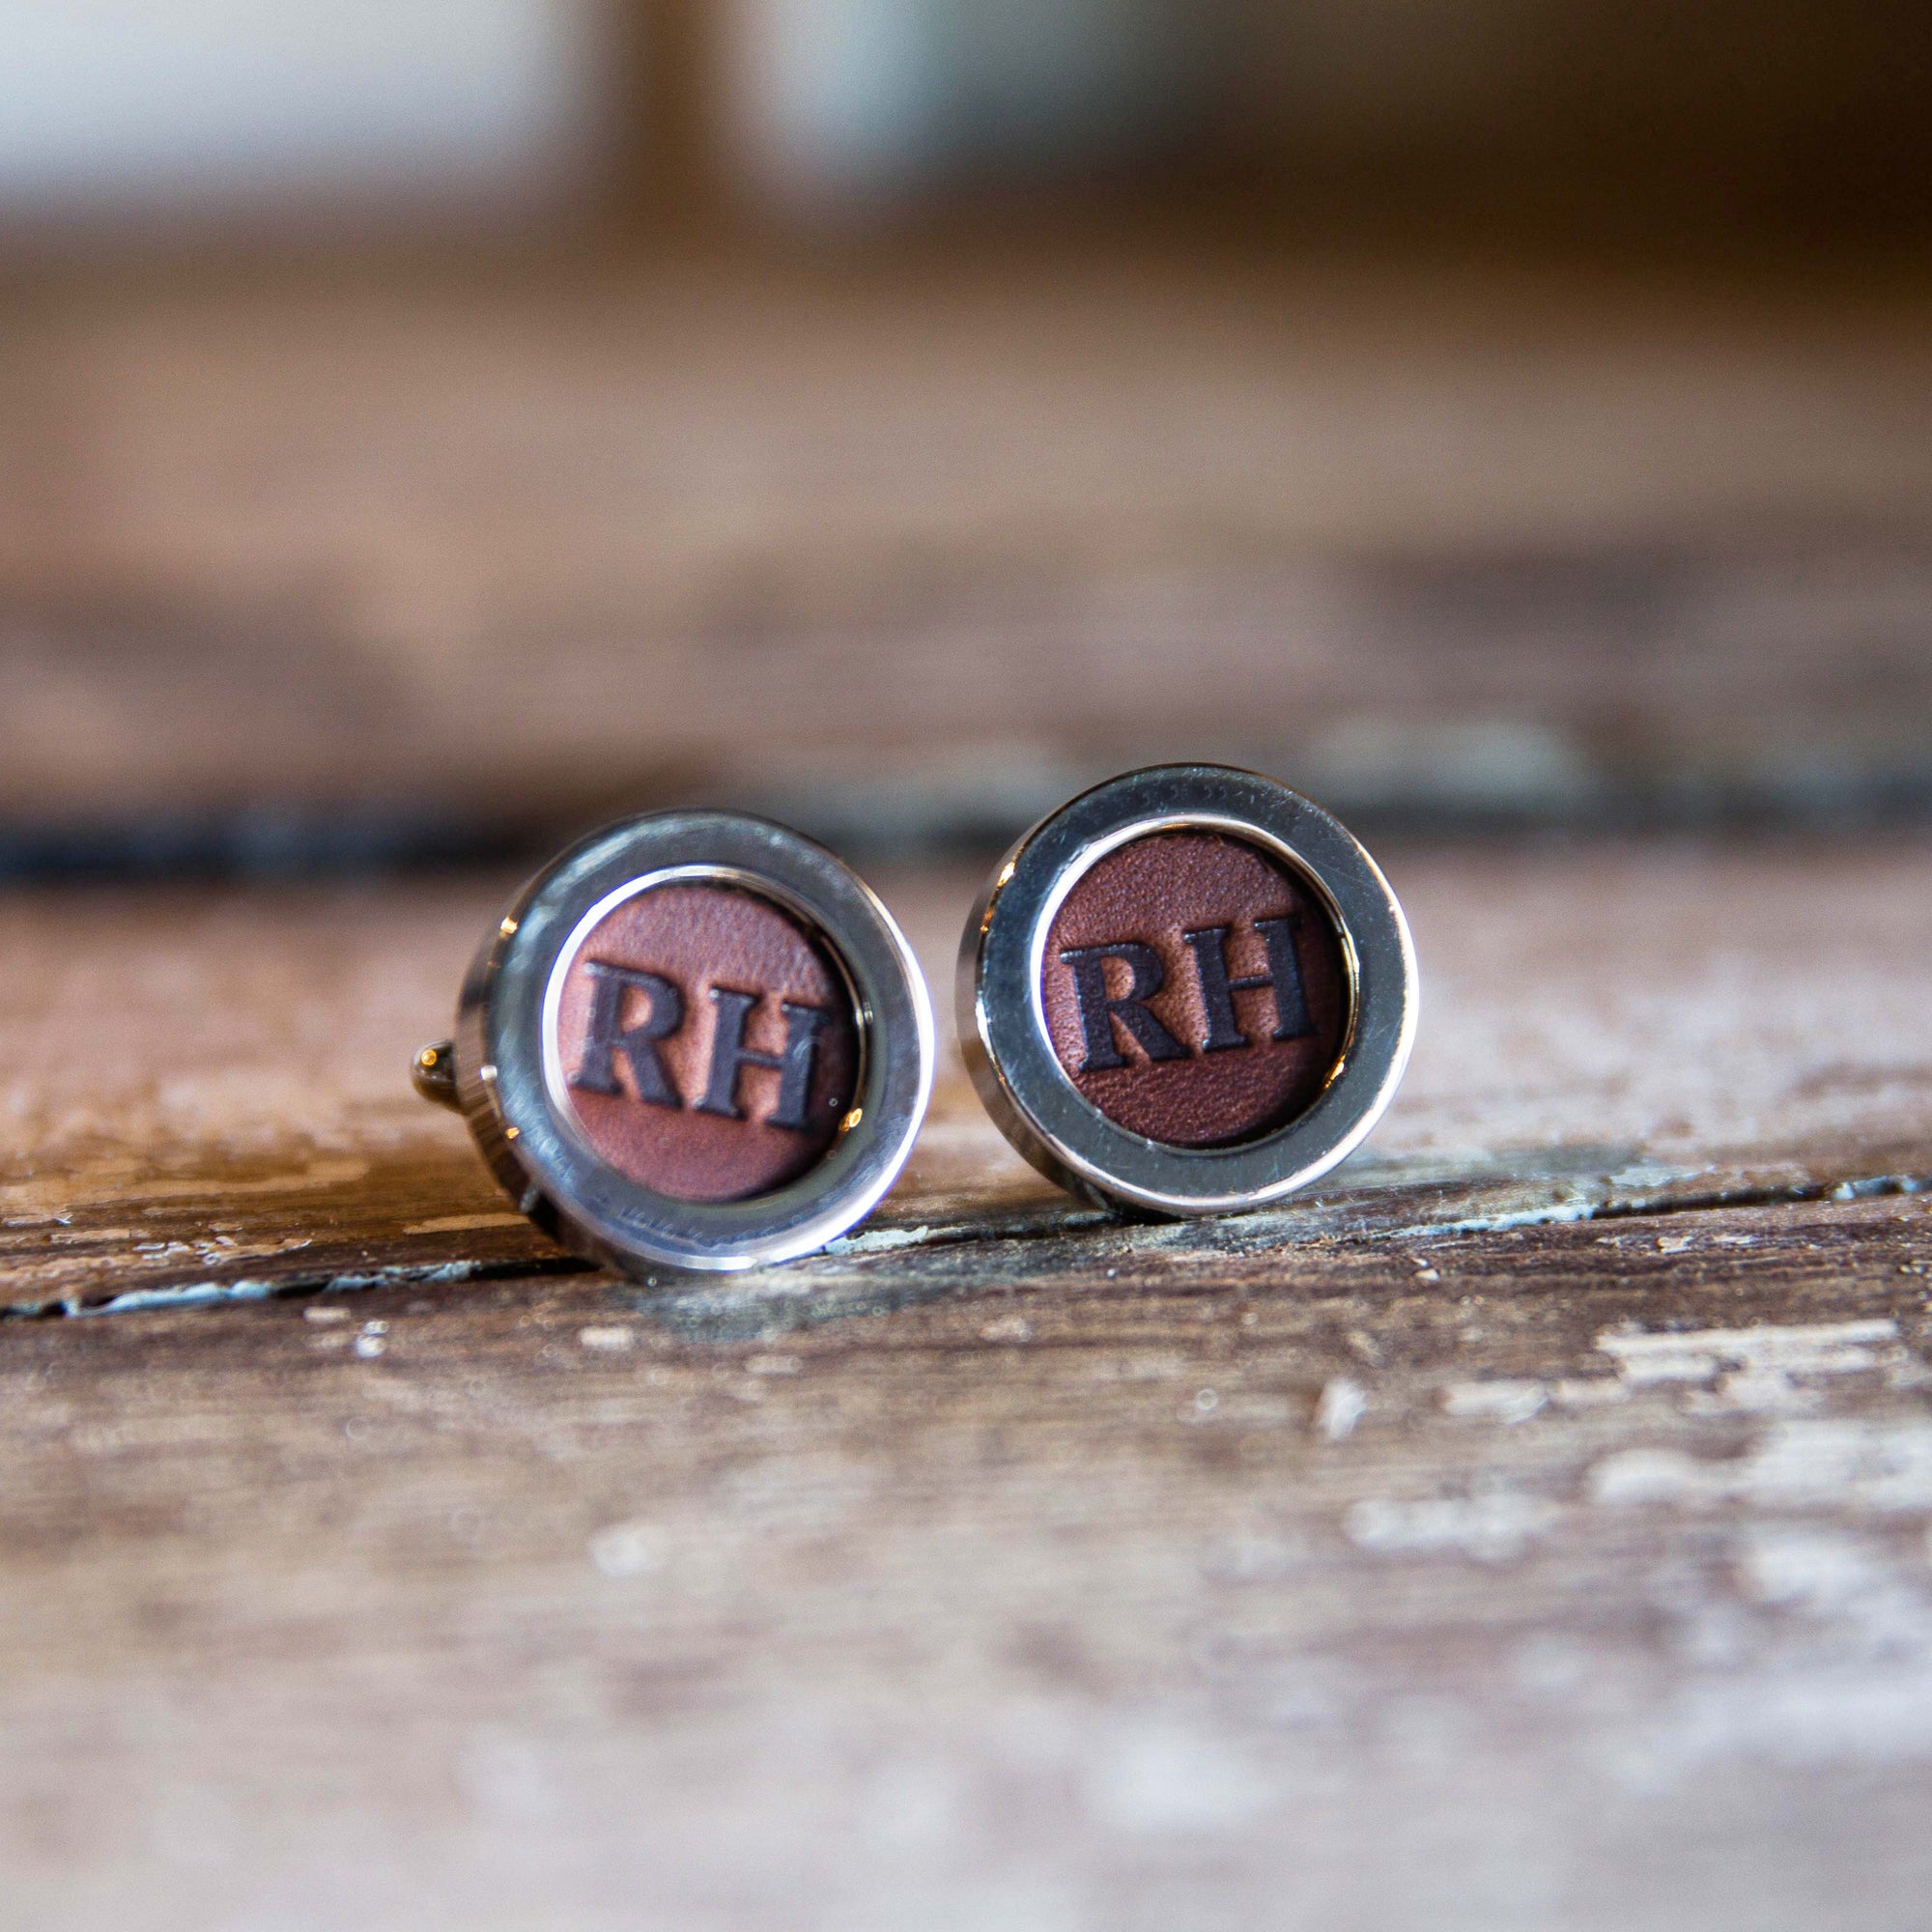 Fine leather cufflink with personalized initials being worn by a person